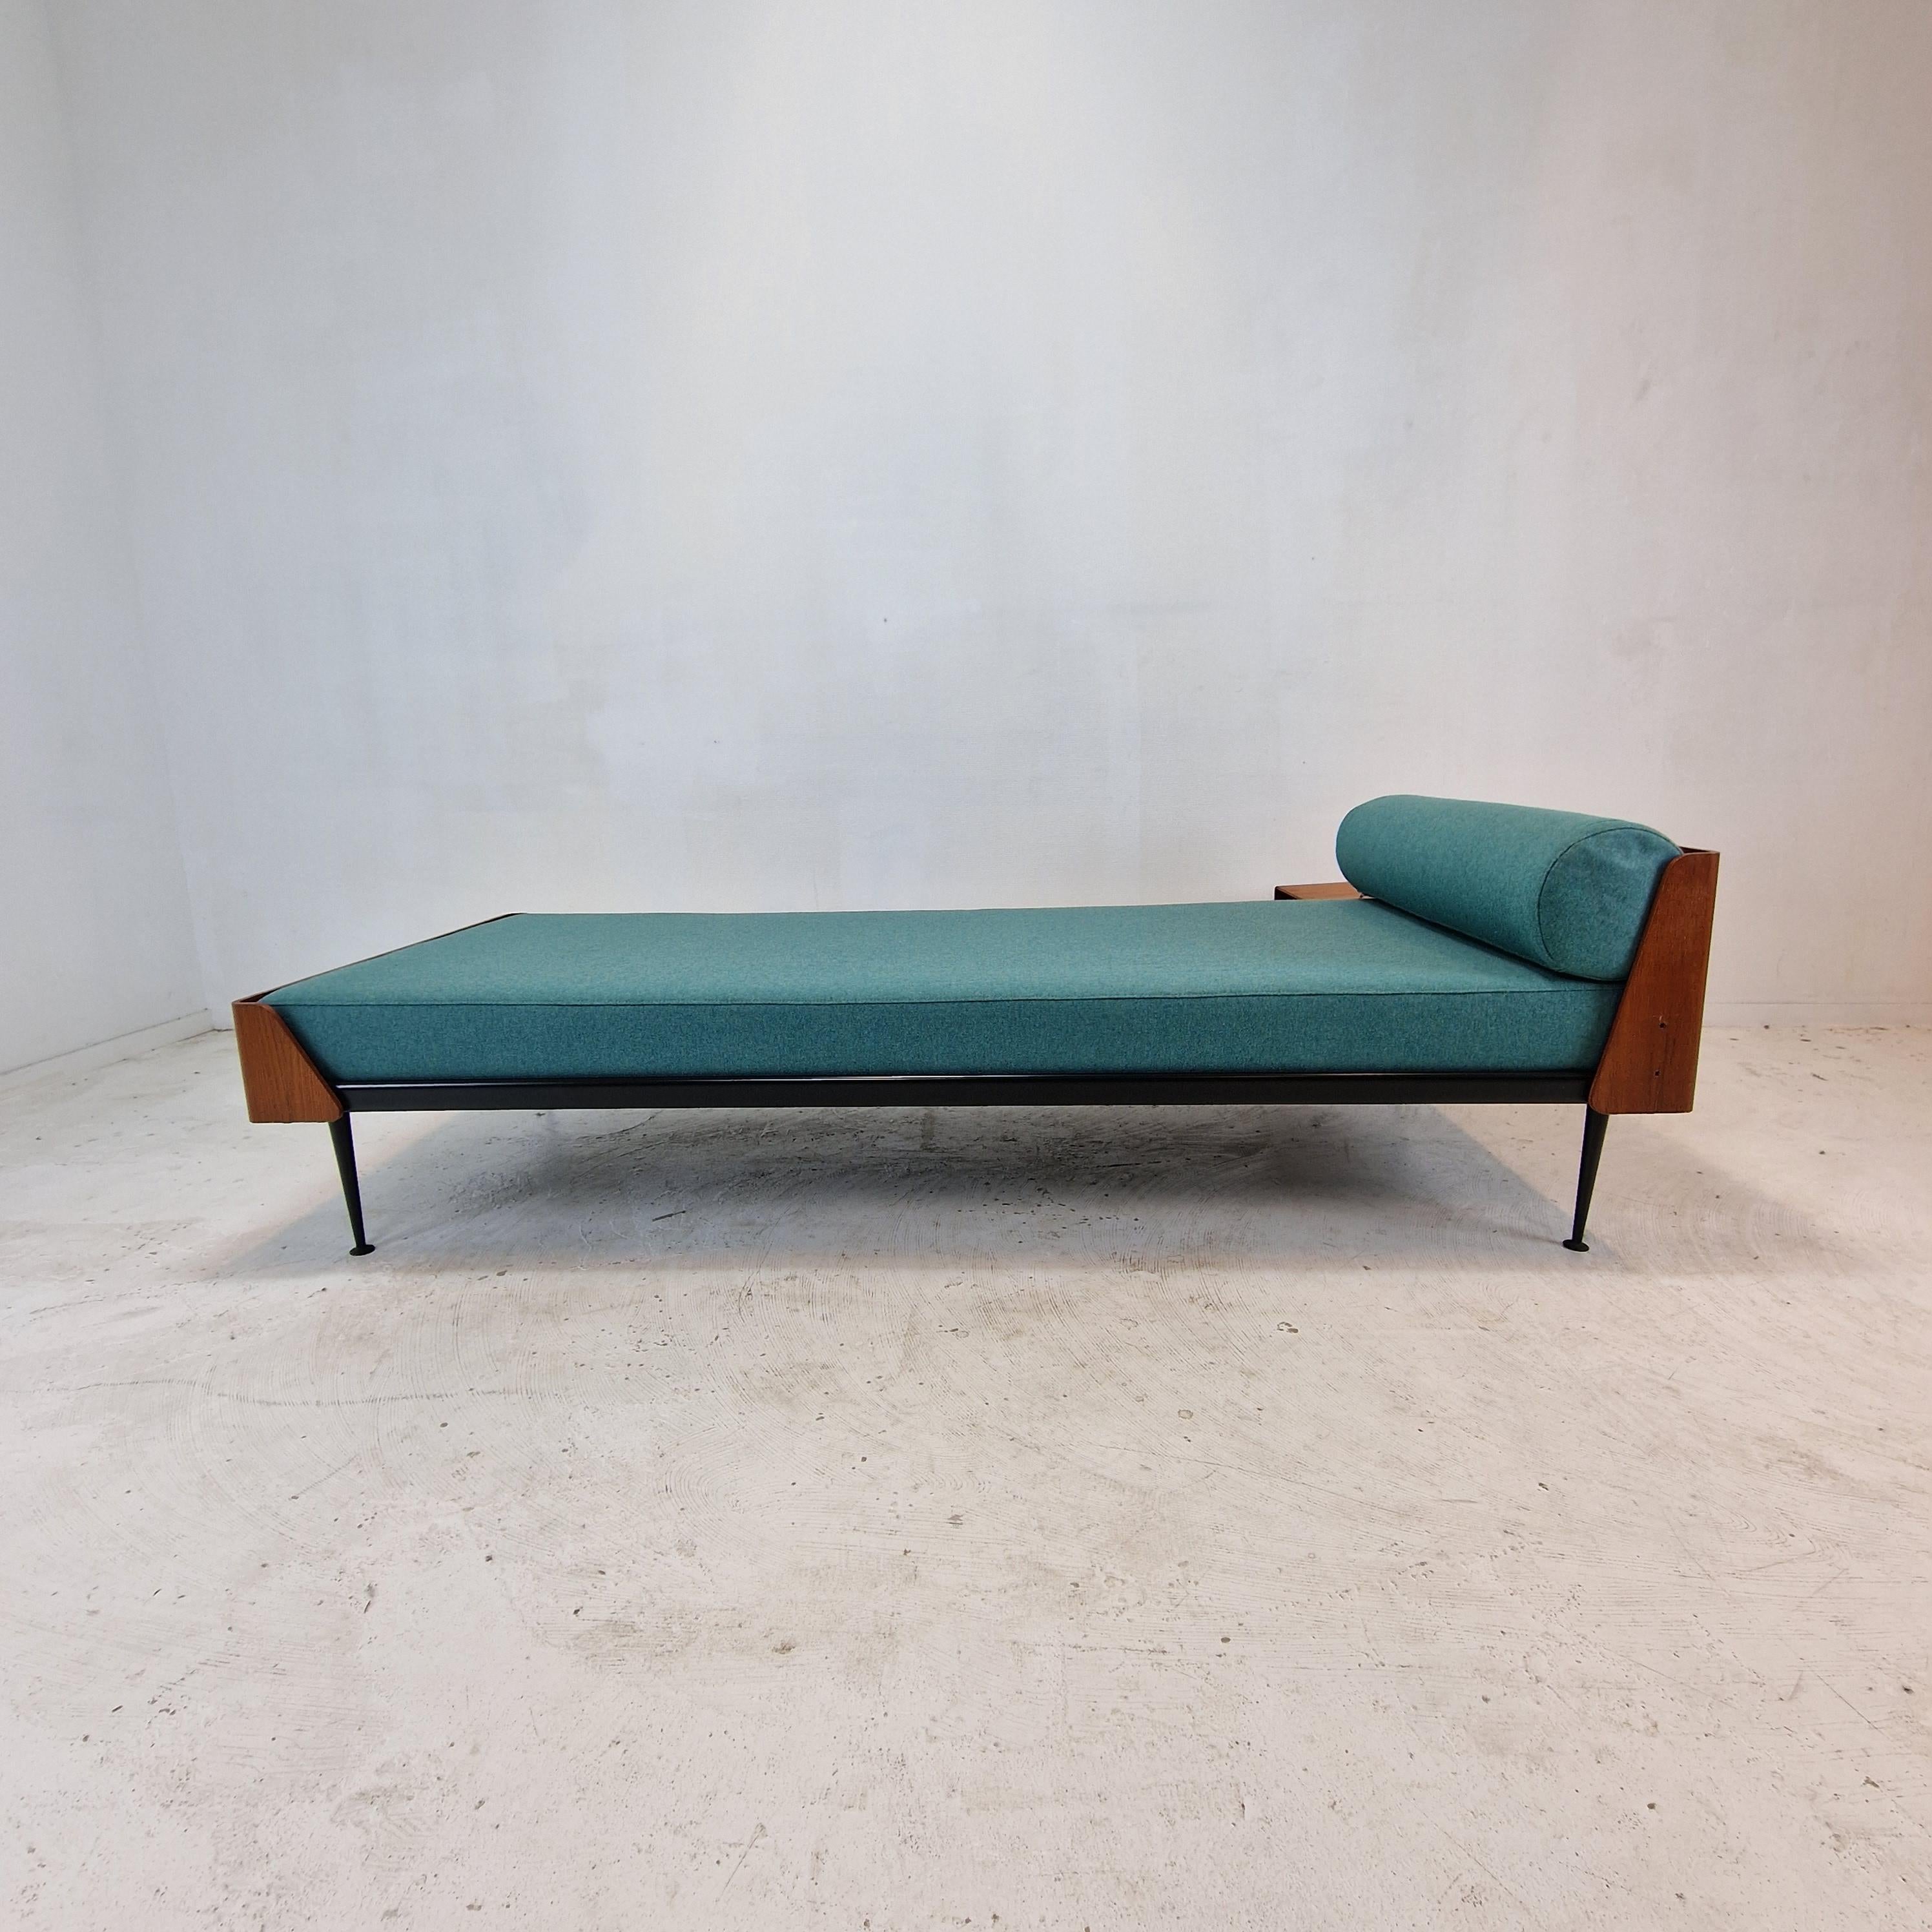 Friso Kramer ‘Euroika’ daybed for Auping Holland, 1960's For Sale 10